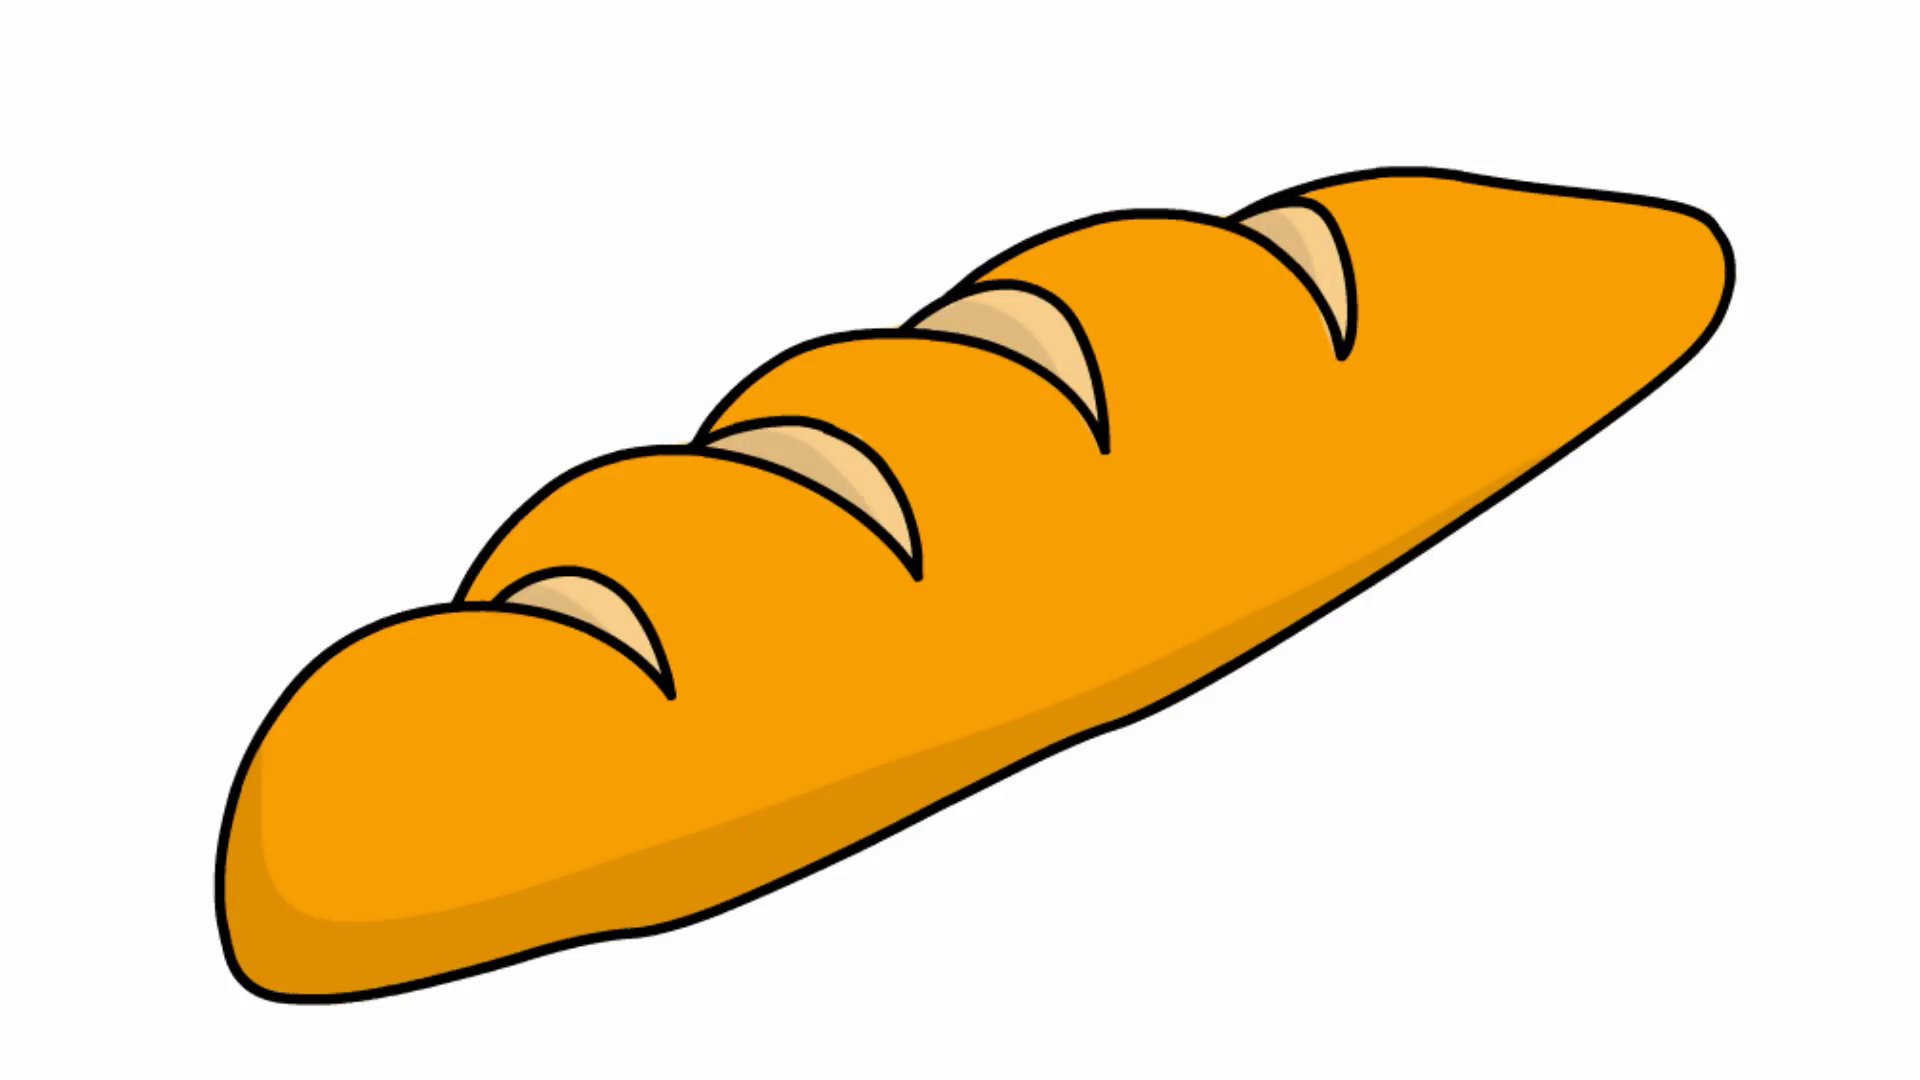 Bread clipart bread french, Bread bread french Transparent FREE for